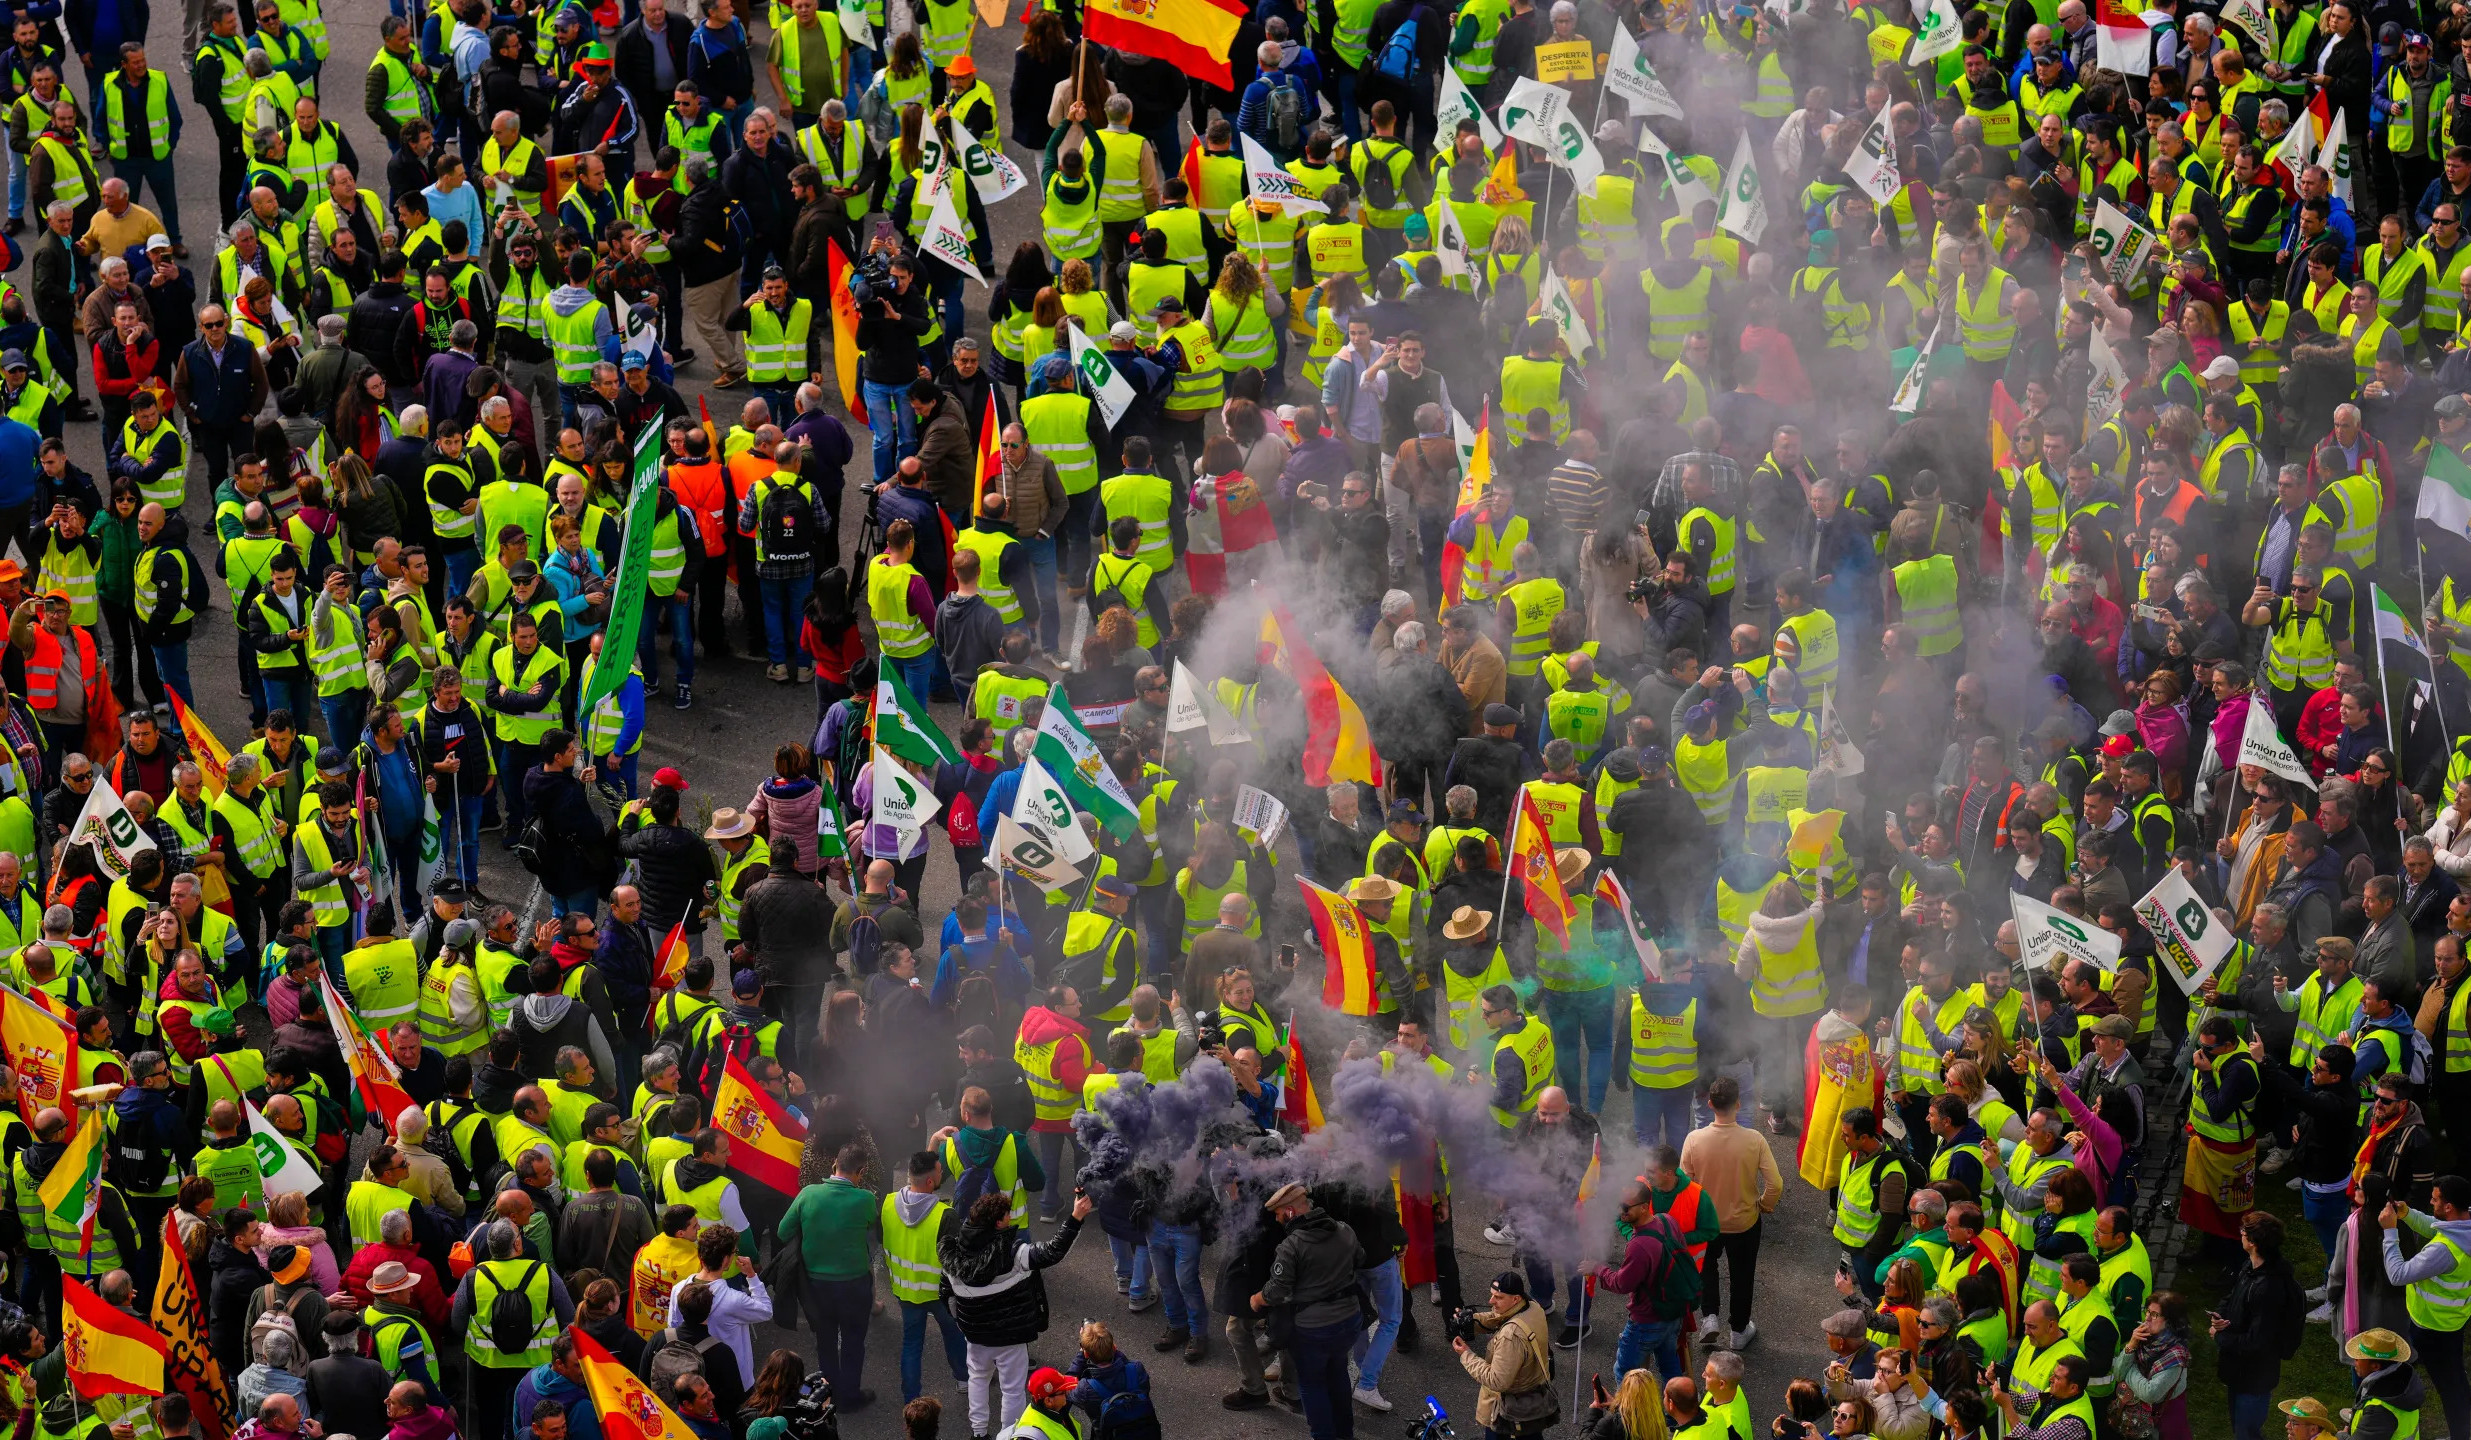 Police scuffles with Spanish farmers in Madrid protest